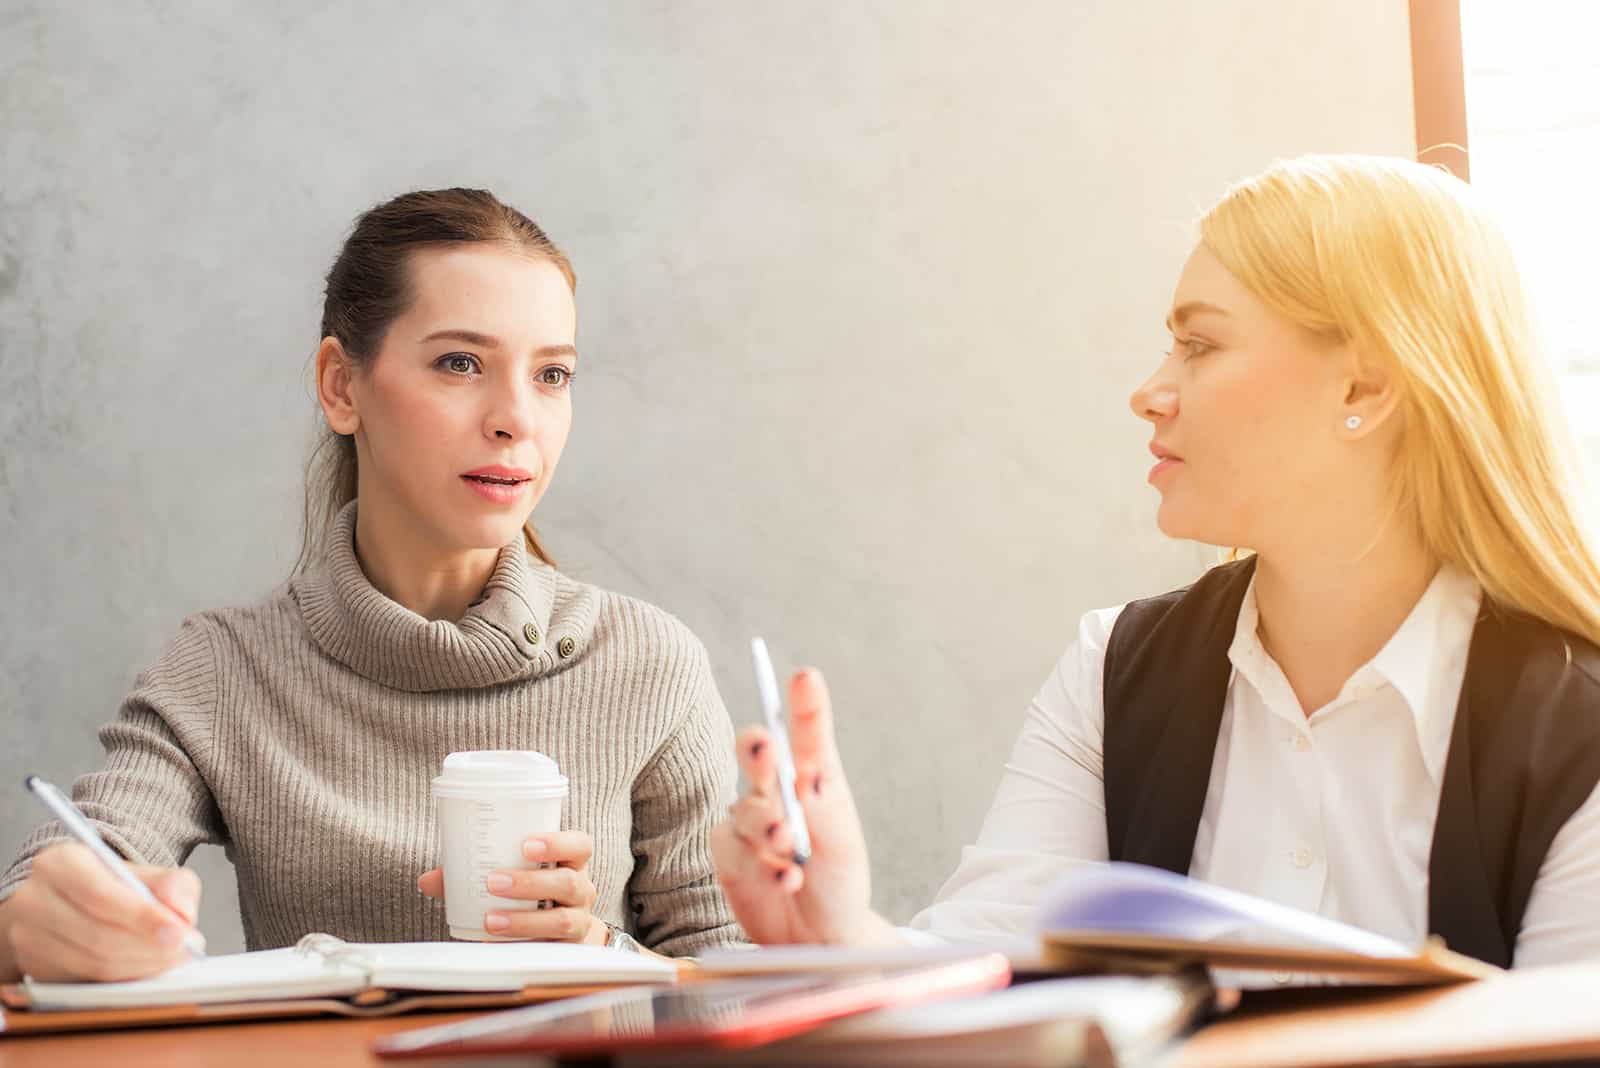 pensive woman listening to female colleague while working together